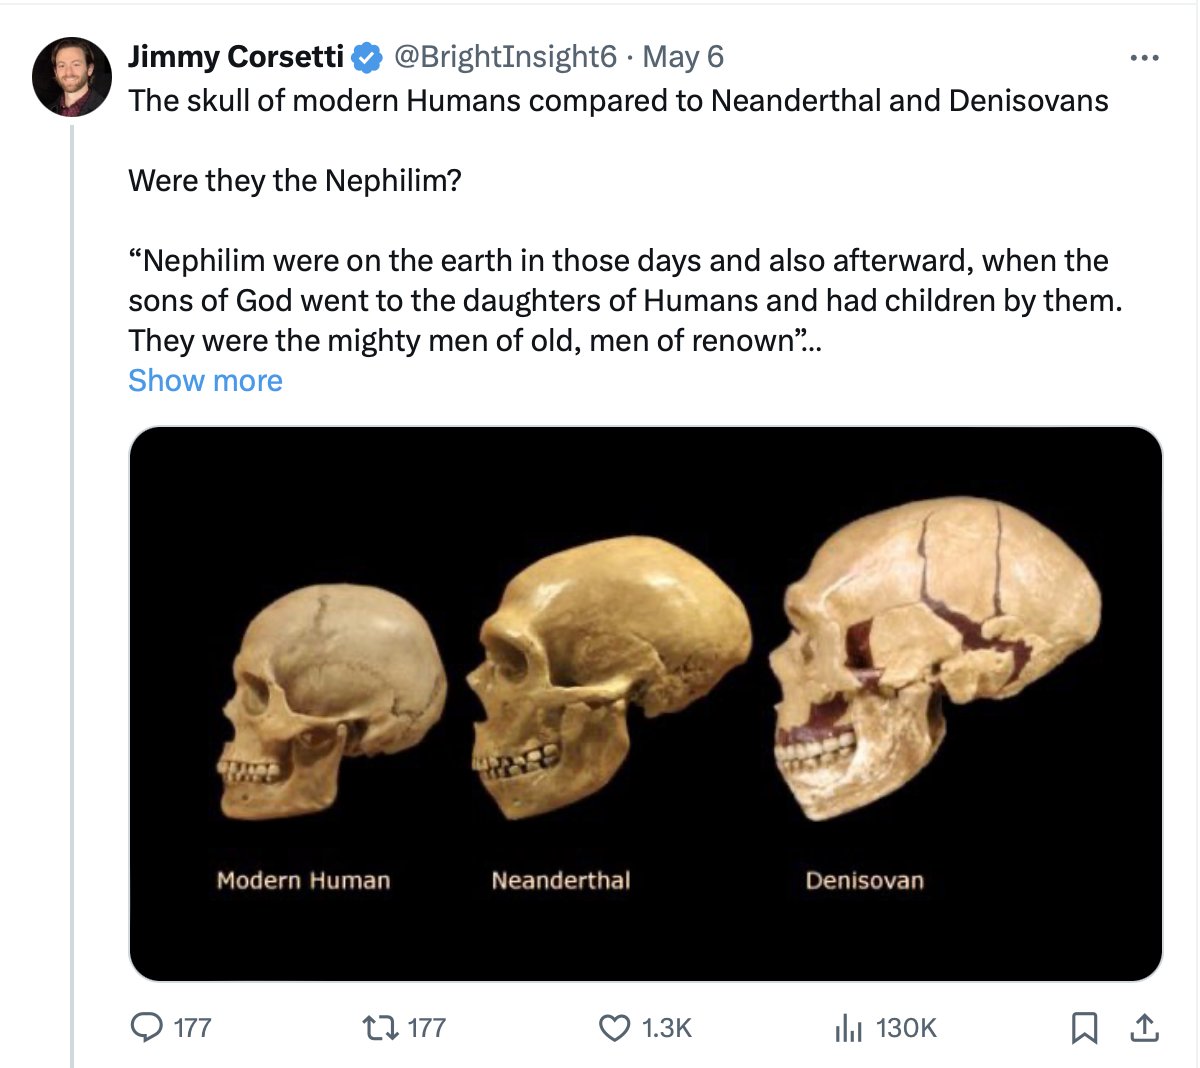 For about 3 years now, have I clarified numerous times that;

1) No Denisovan skulls have been found.
2) Denisovans are not Giants.
3) Denisovans are almost the same as Neanderthals, slight differences, but they are closest related.
4) STOP SPREADING THIS LUDICROUS BULLSHIT..🙄